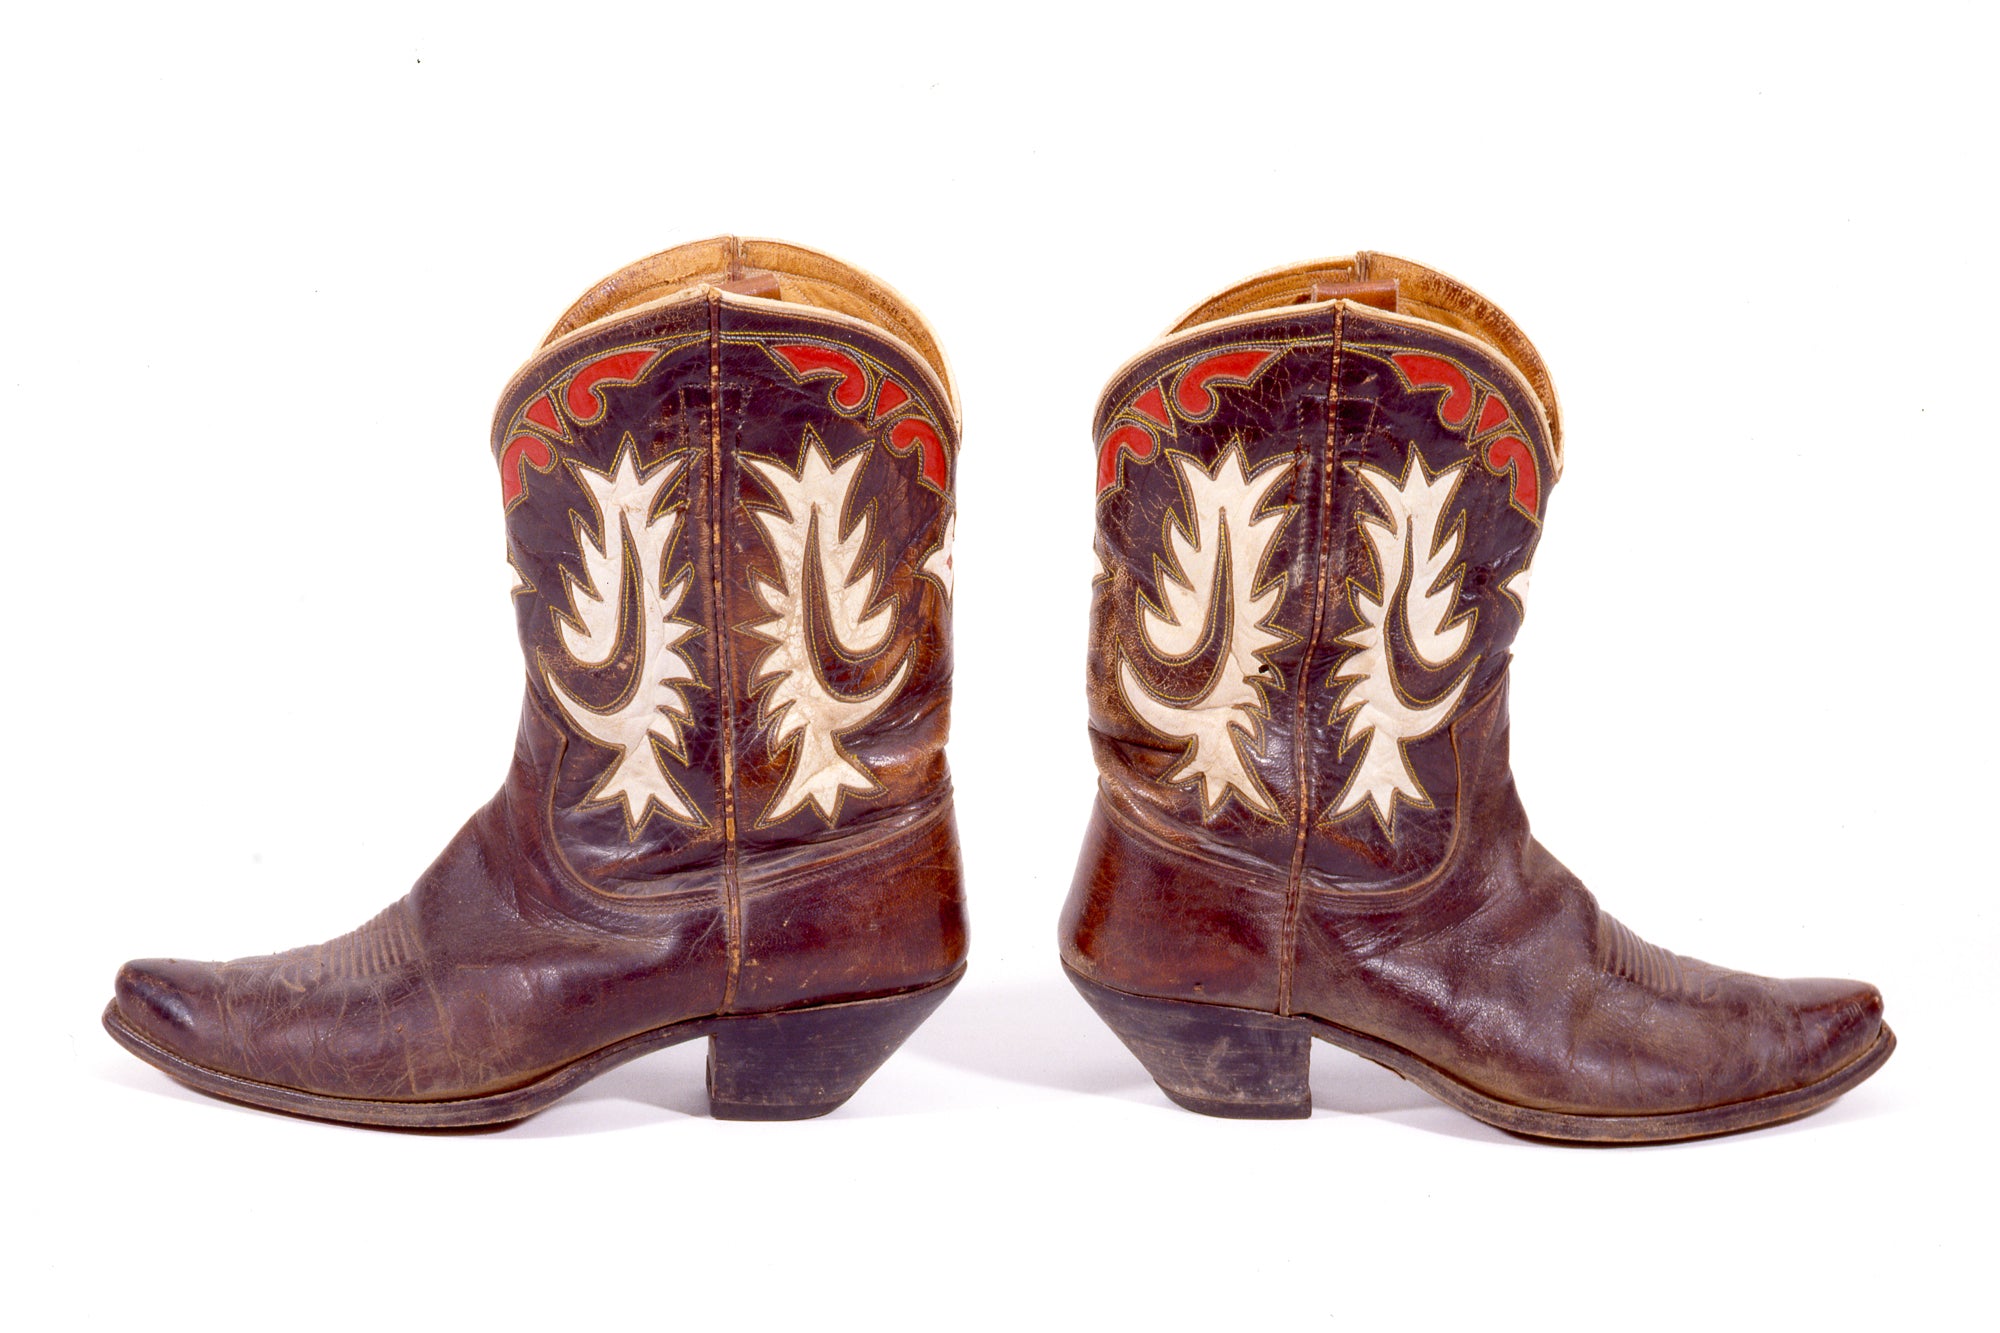 Old Shorty, Cowboy boots, still life from JULES FRAZIER